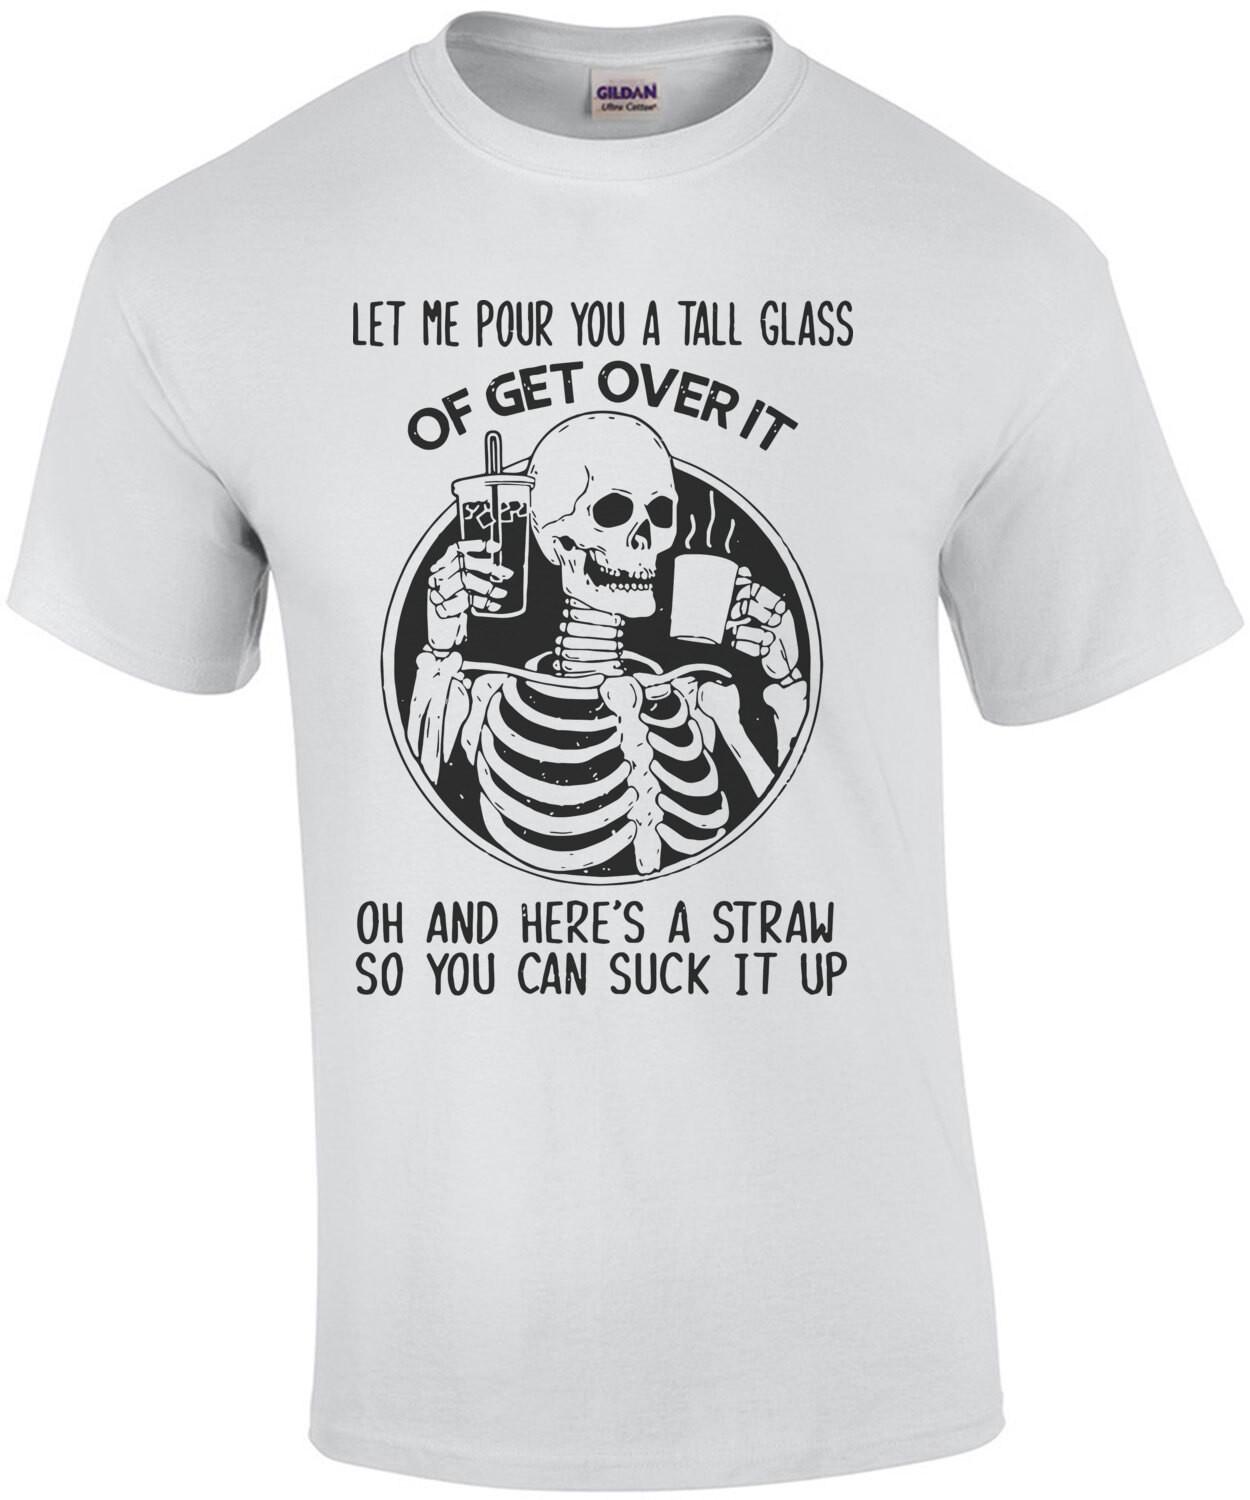 Let Me Pour You a Tall Glass of Get Over It - Sarcastic Shirt